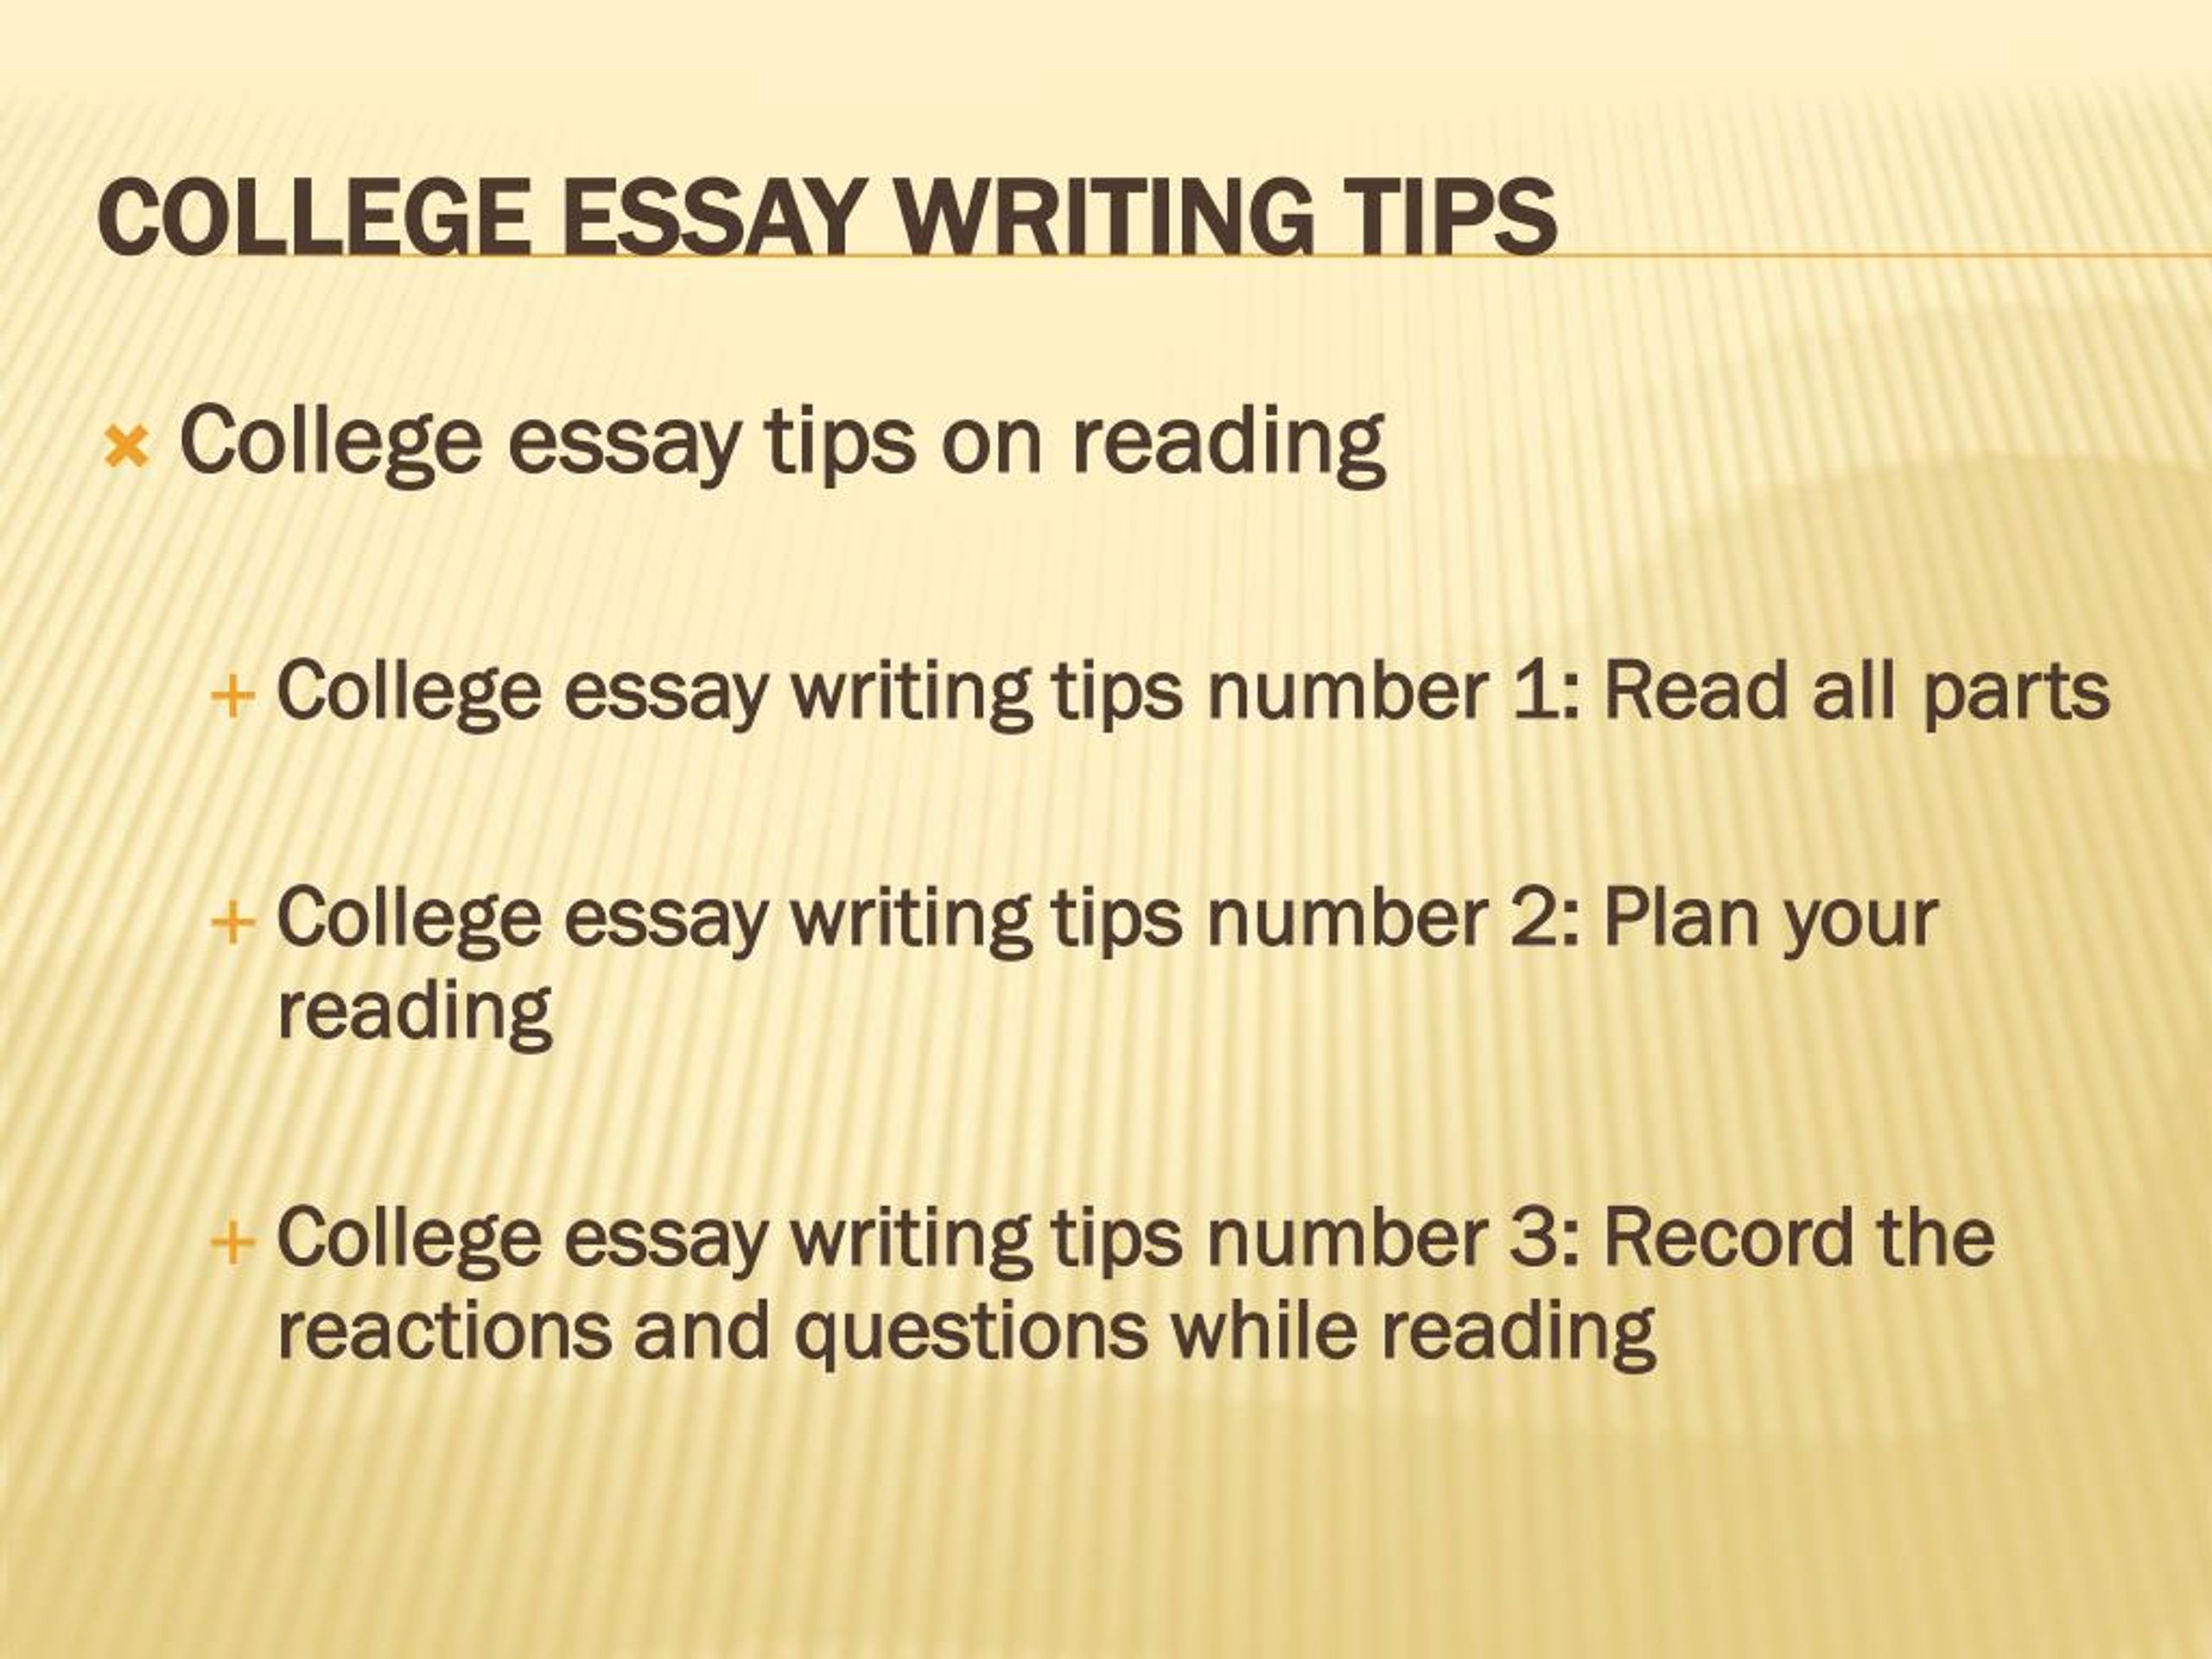 tips to writing college essays